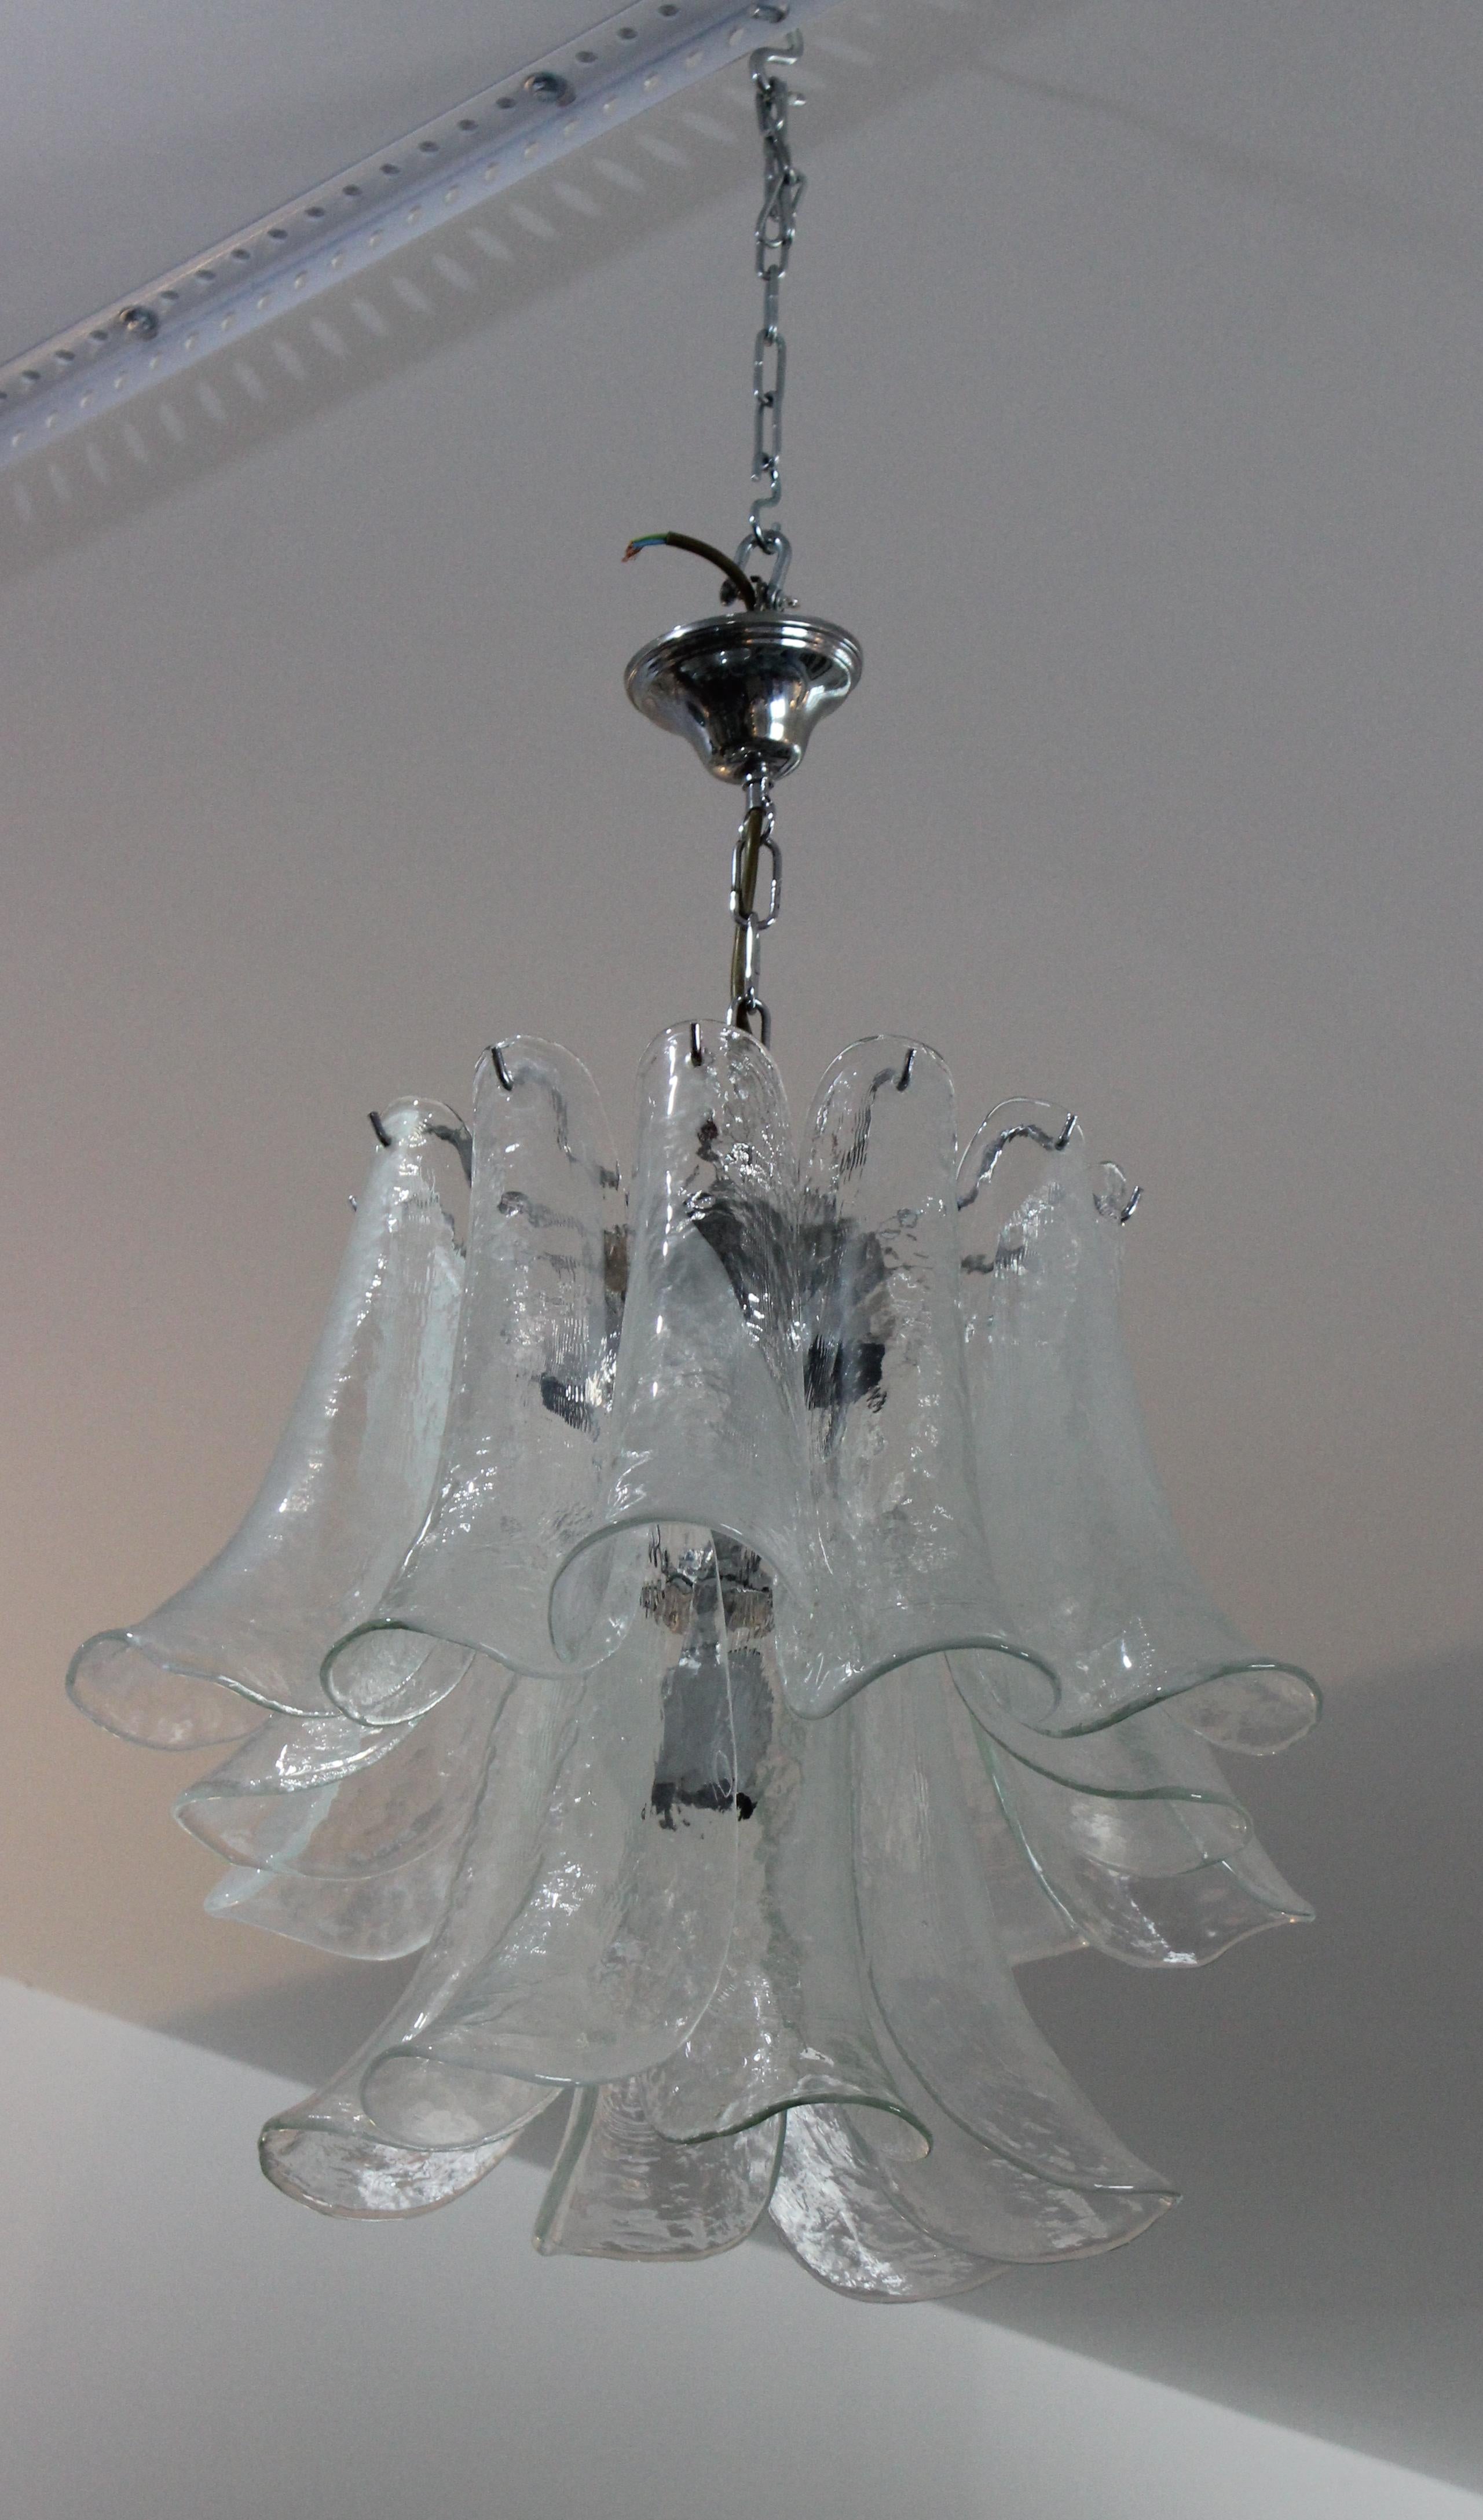 Hand-Crafted Mazzega Glass Chandelier